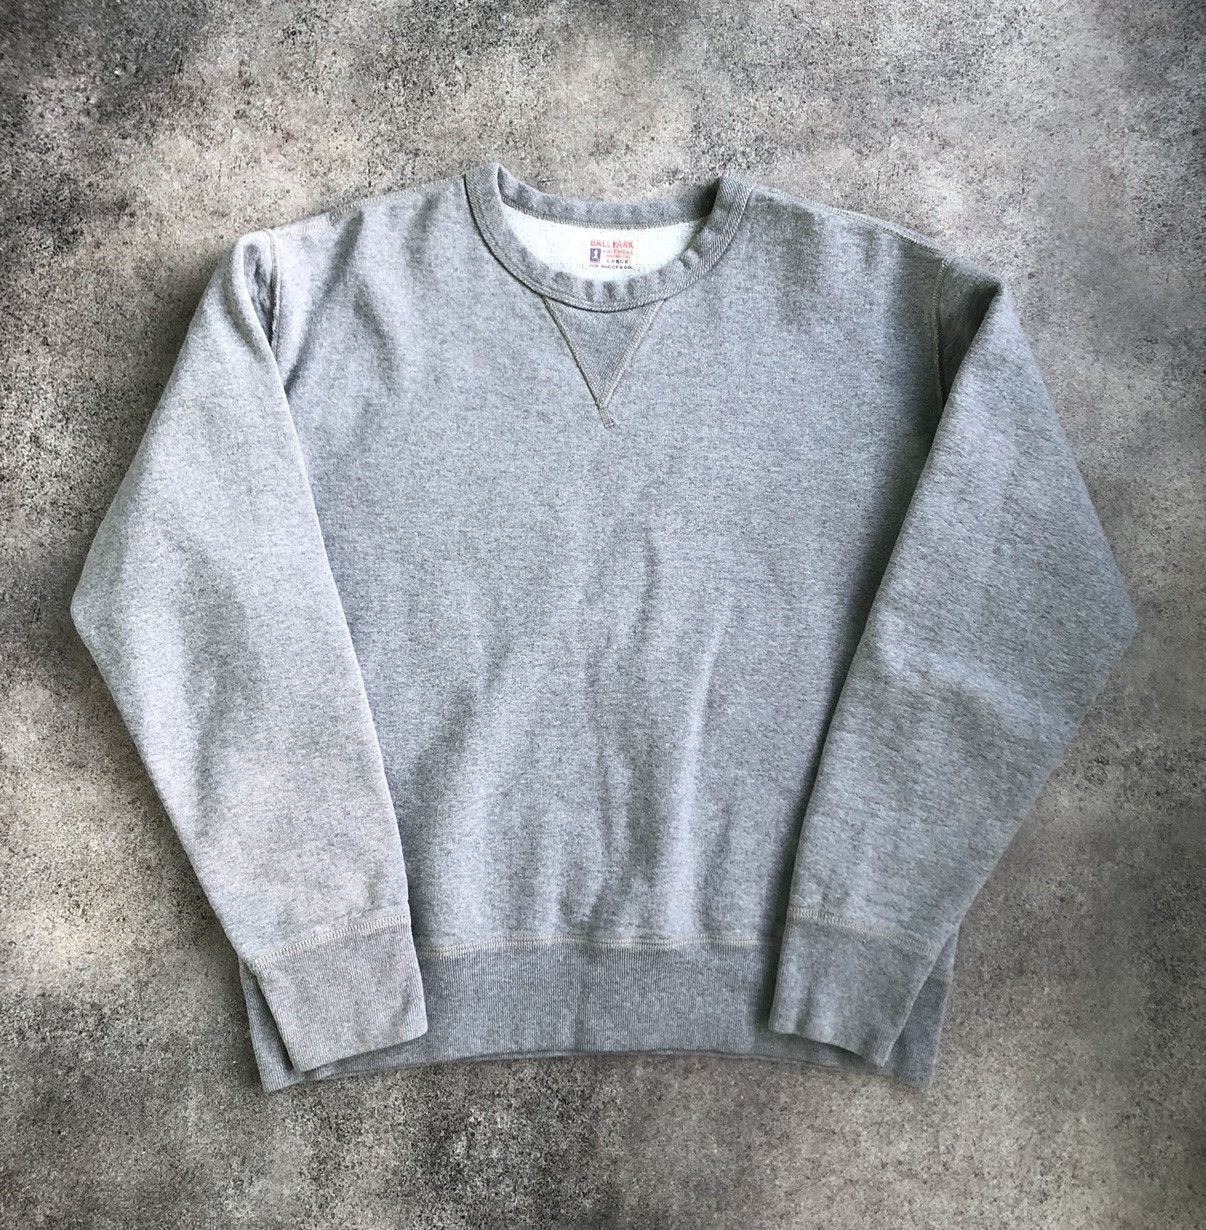 The Real McCoy's The Real McCoy’s loopwheel grey sweatshirt Size US L / EU 52-54 / 3 - 1 Preview